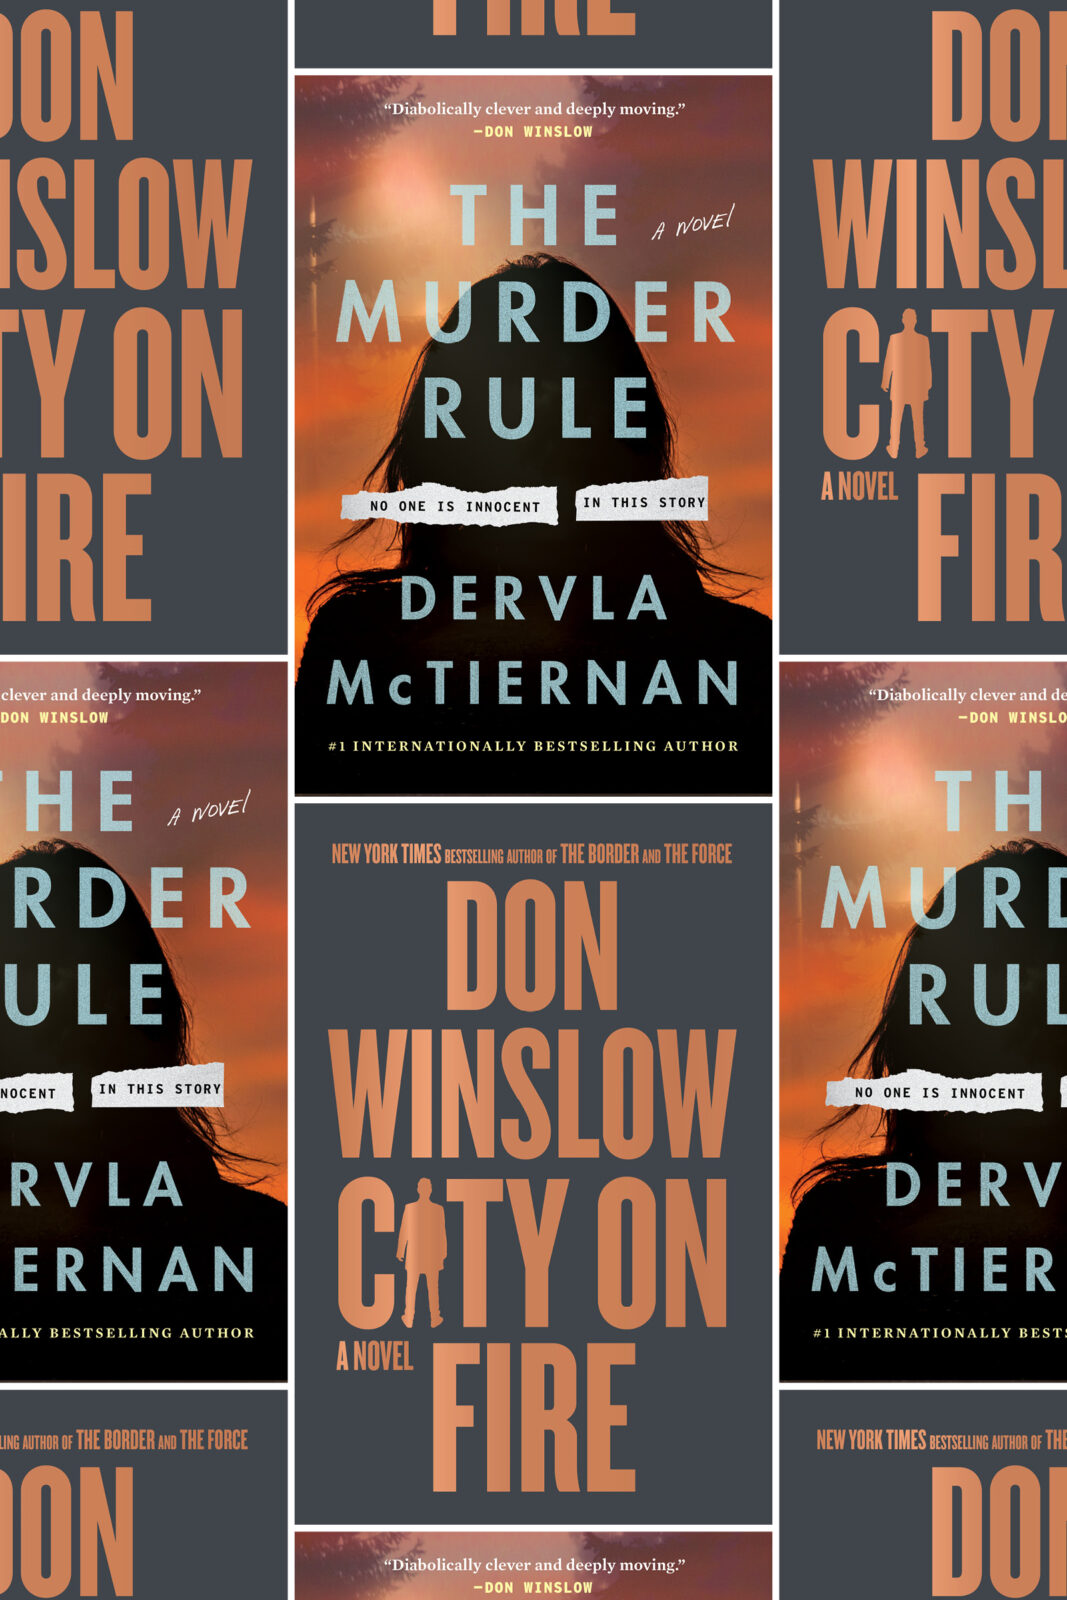  Don Winslow: books, biography, latest update